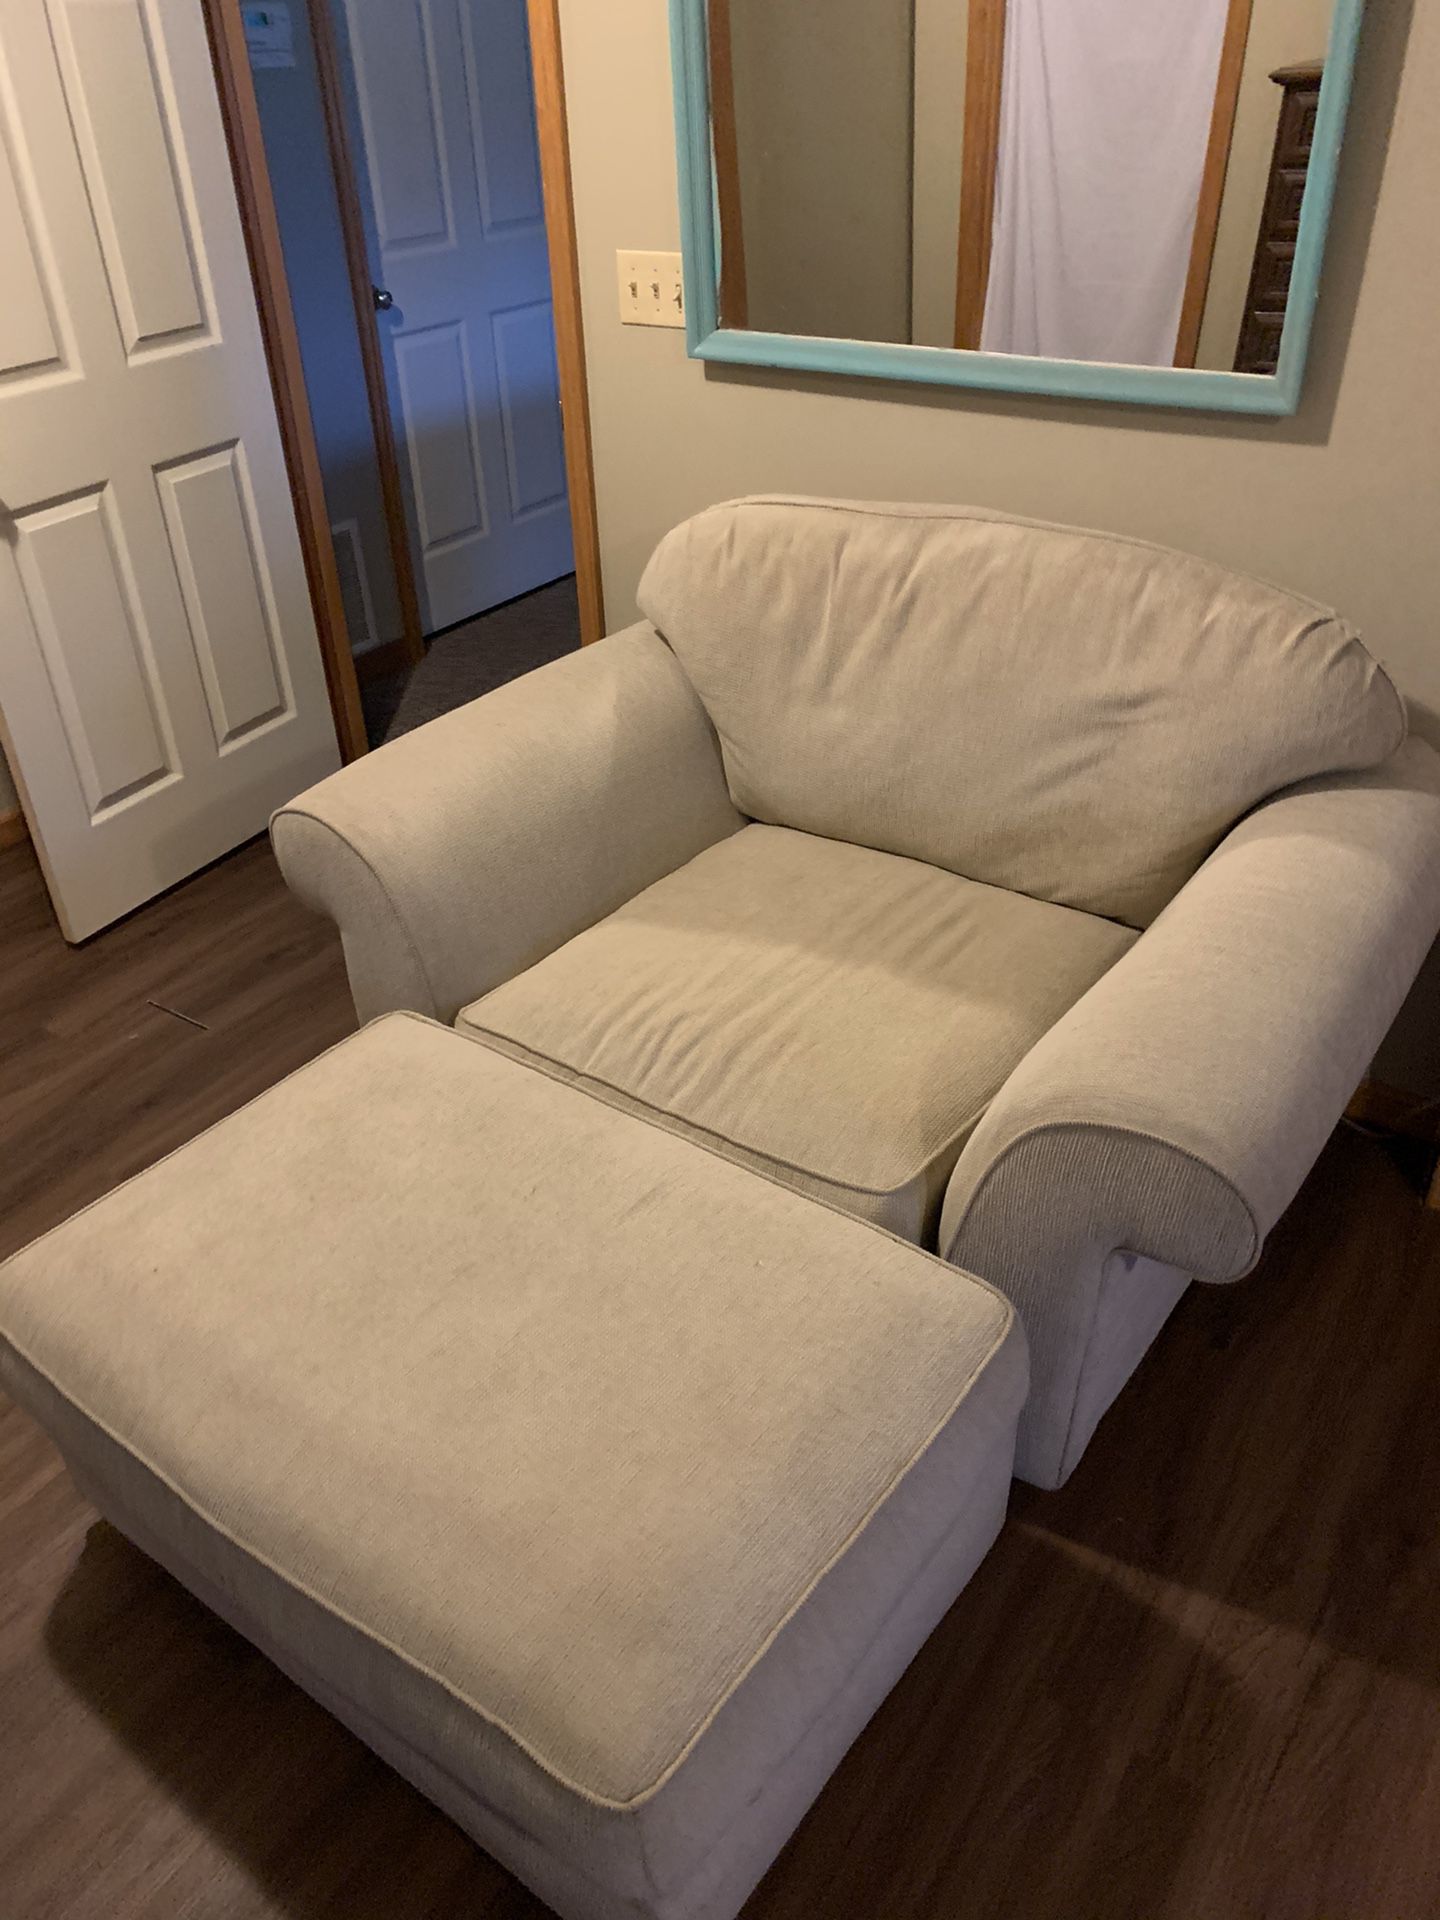 Oversized comfy chair with ottoman